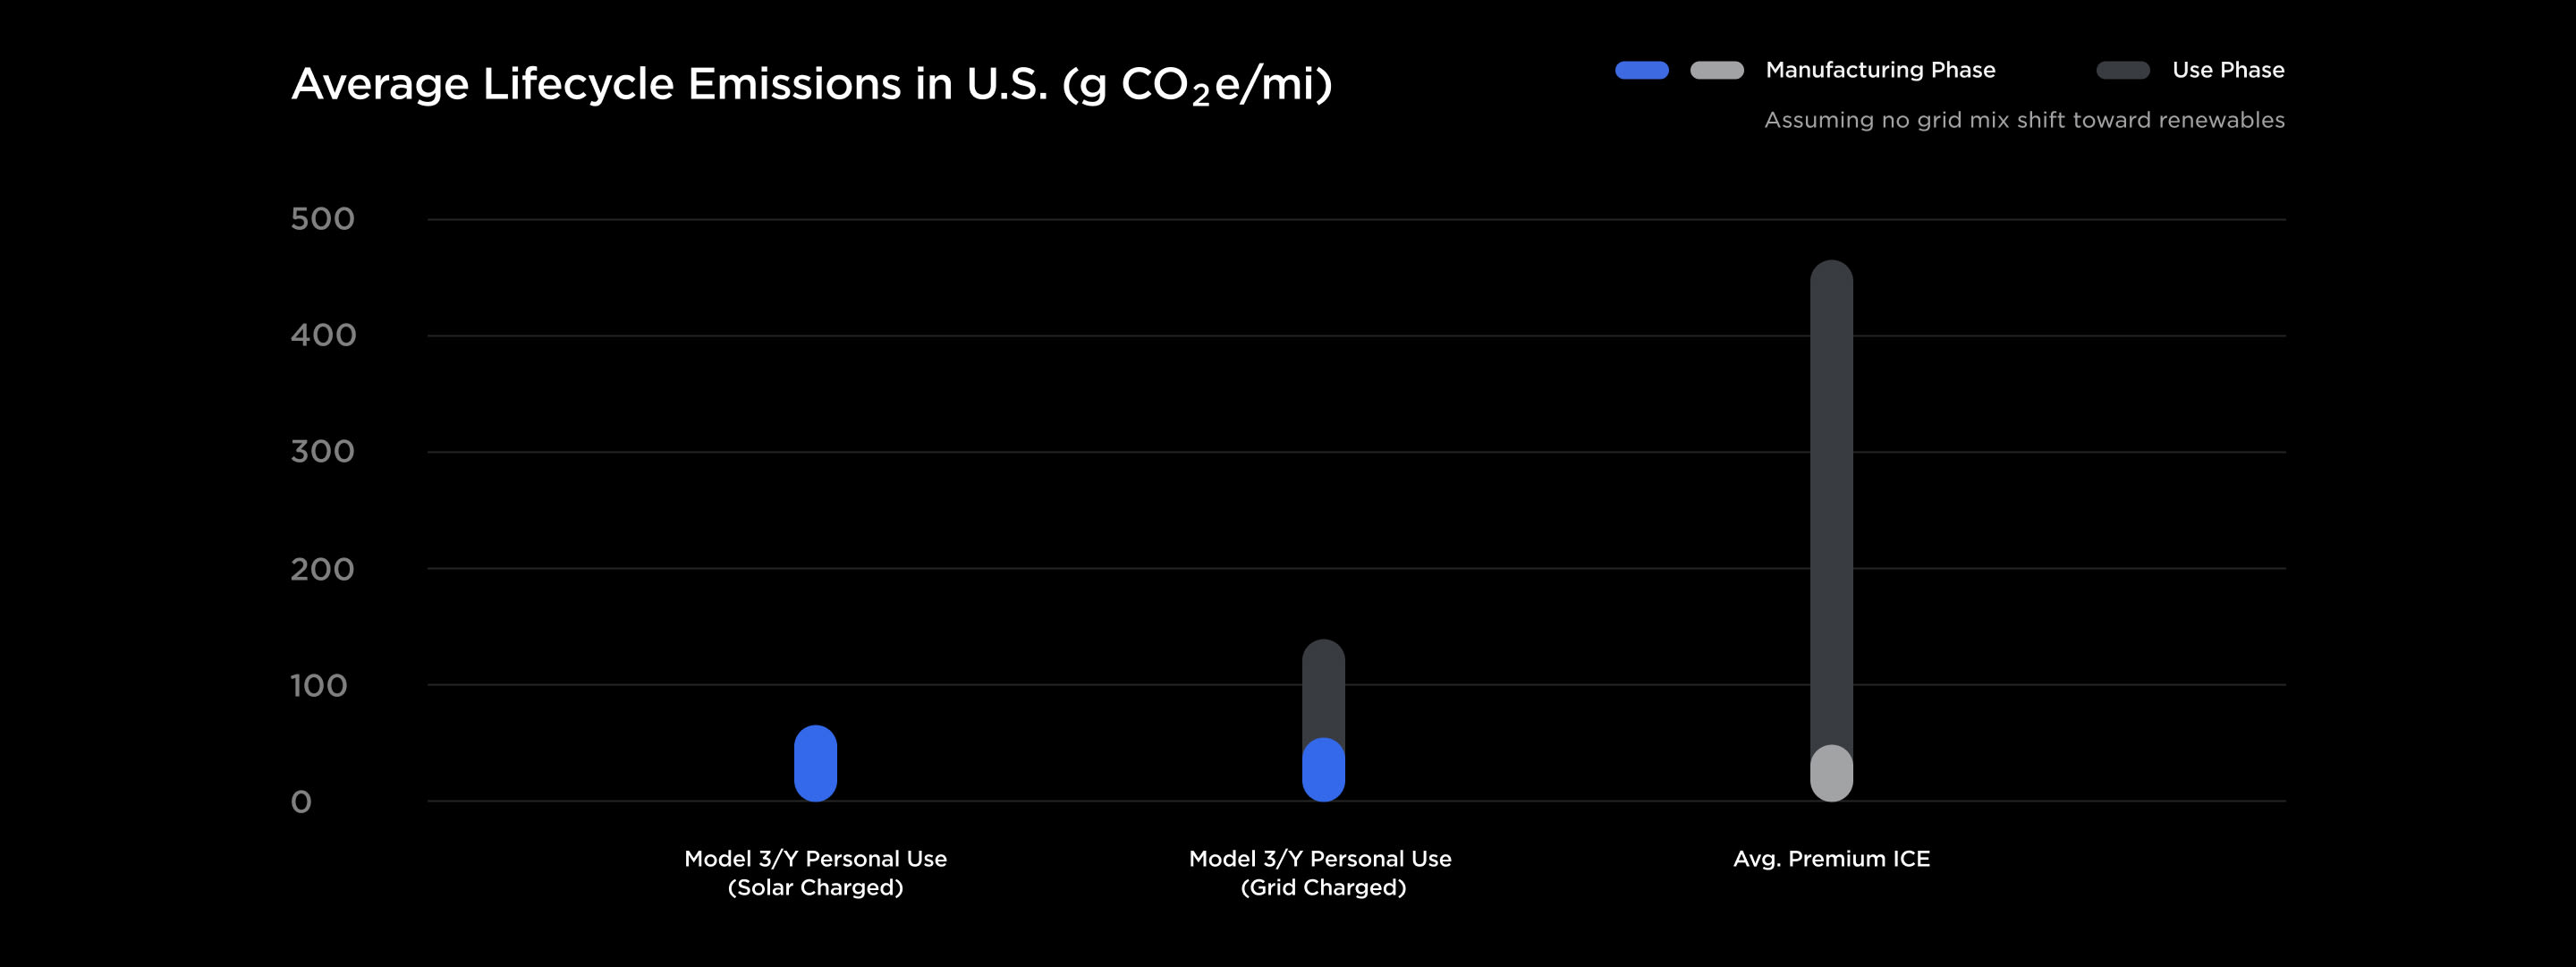 Average lifecycle emissions in United States